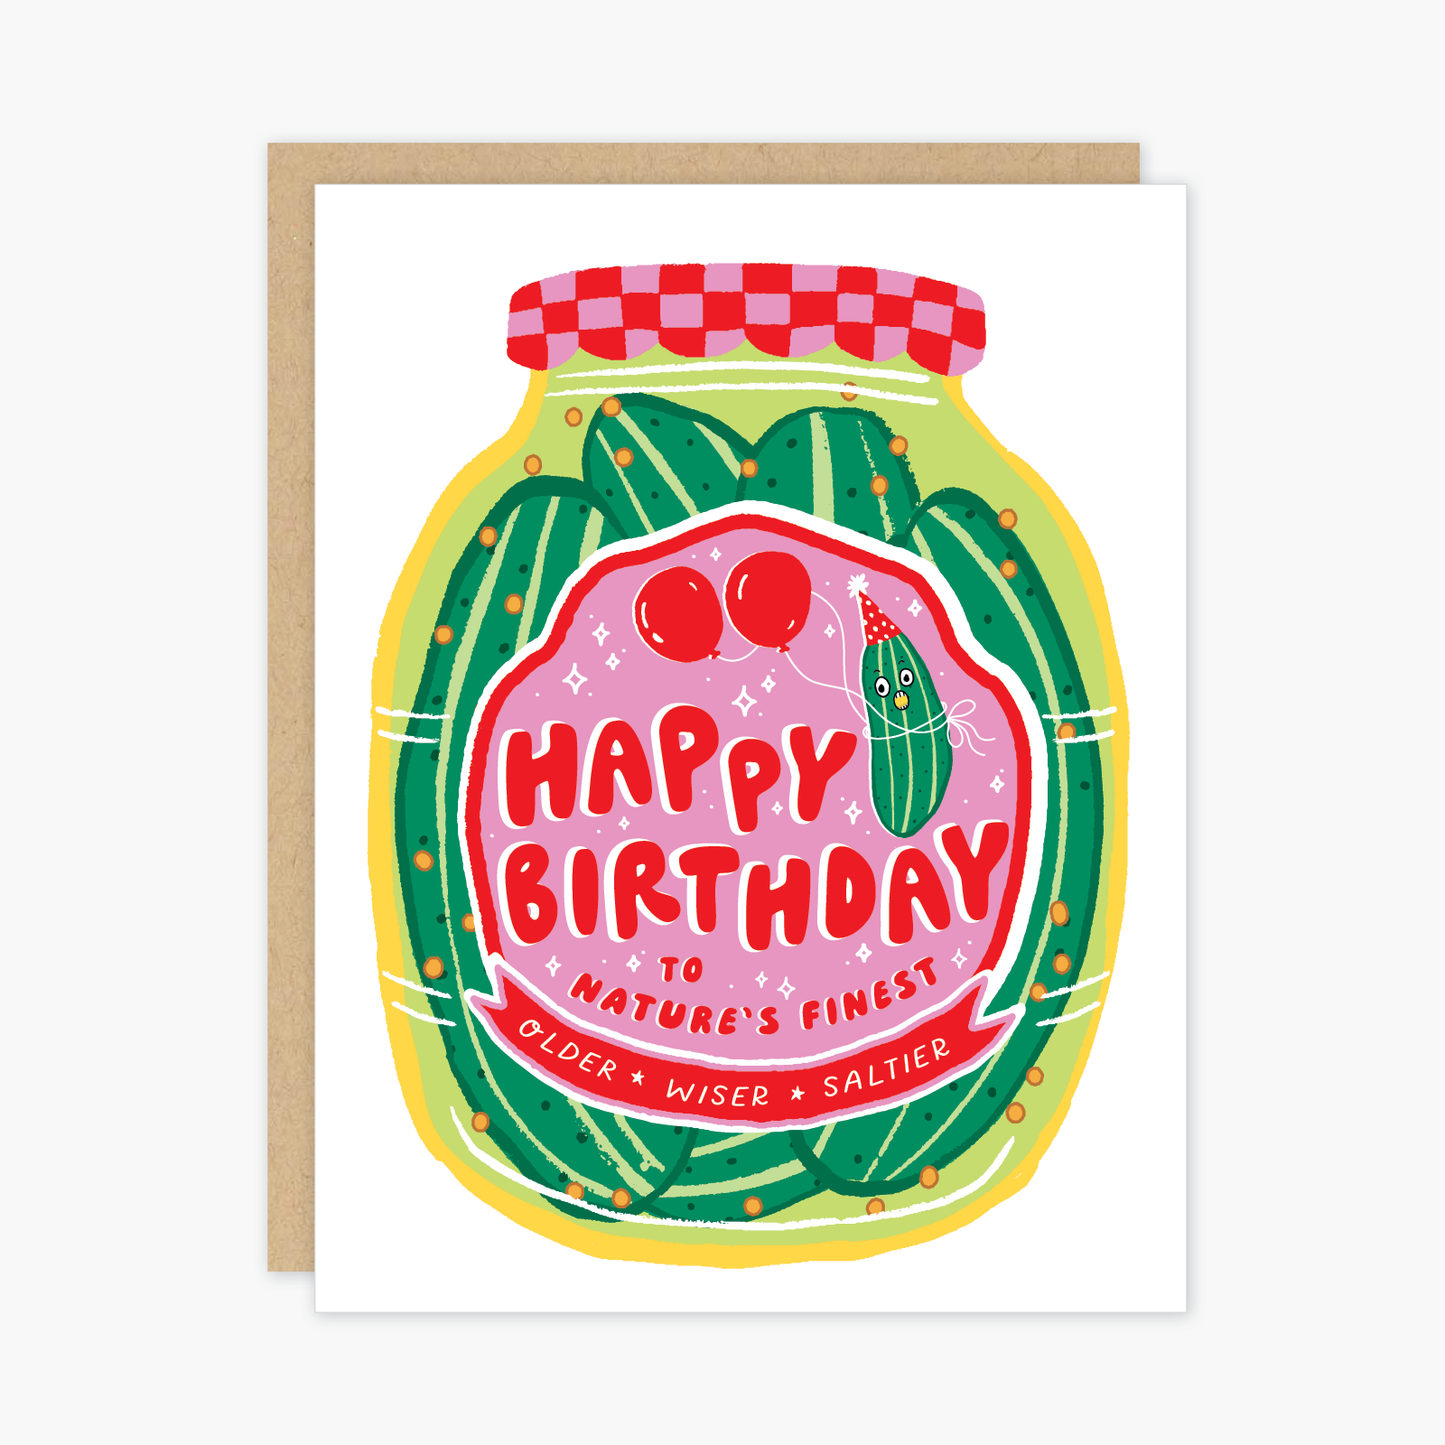 Greeting card with illustration of a jar of pickles with a pink and red checkered lid. Label depicts a pickle with a surprised face wearing a party hat and two red balloons tied around it's waist, text reads " Happy Birthday to Nature's Finest... Older, Wiser, Saltier"